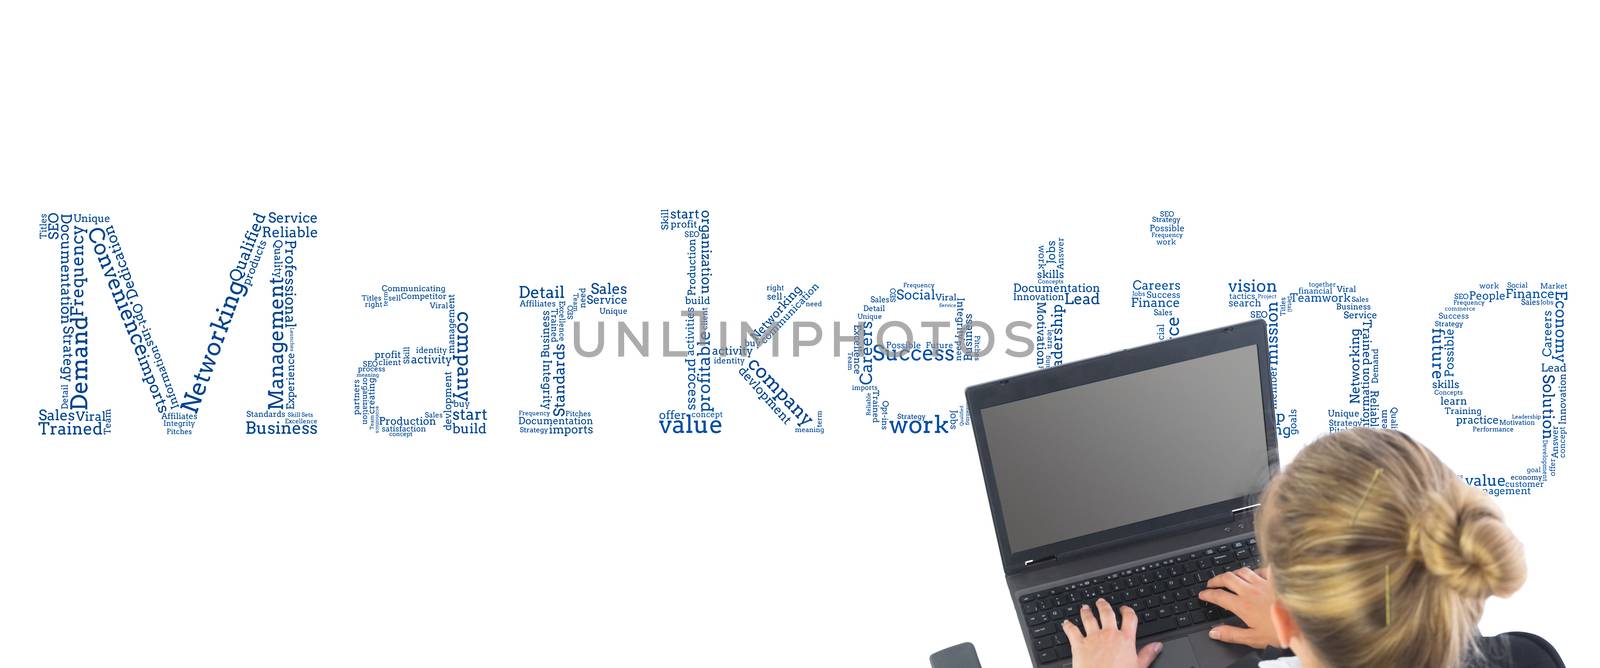 Composite image of blonde businesswoman sitting on swivel chair with laptop